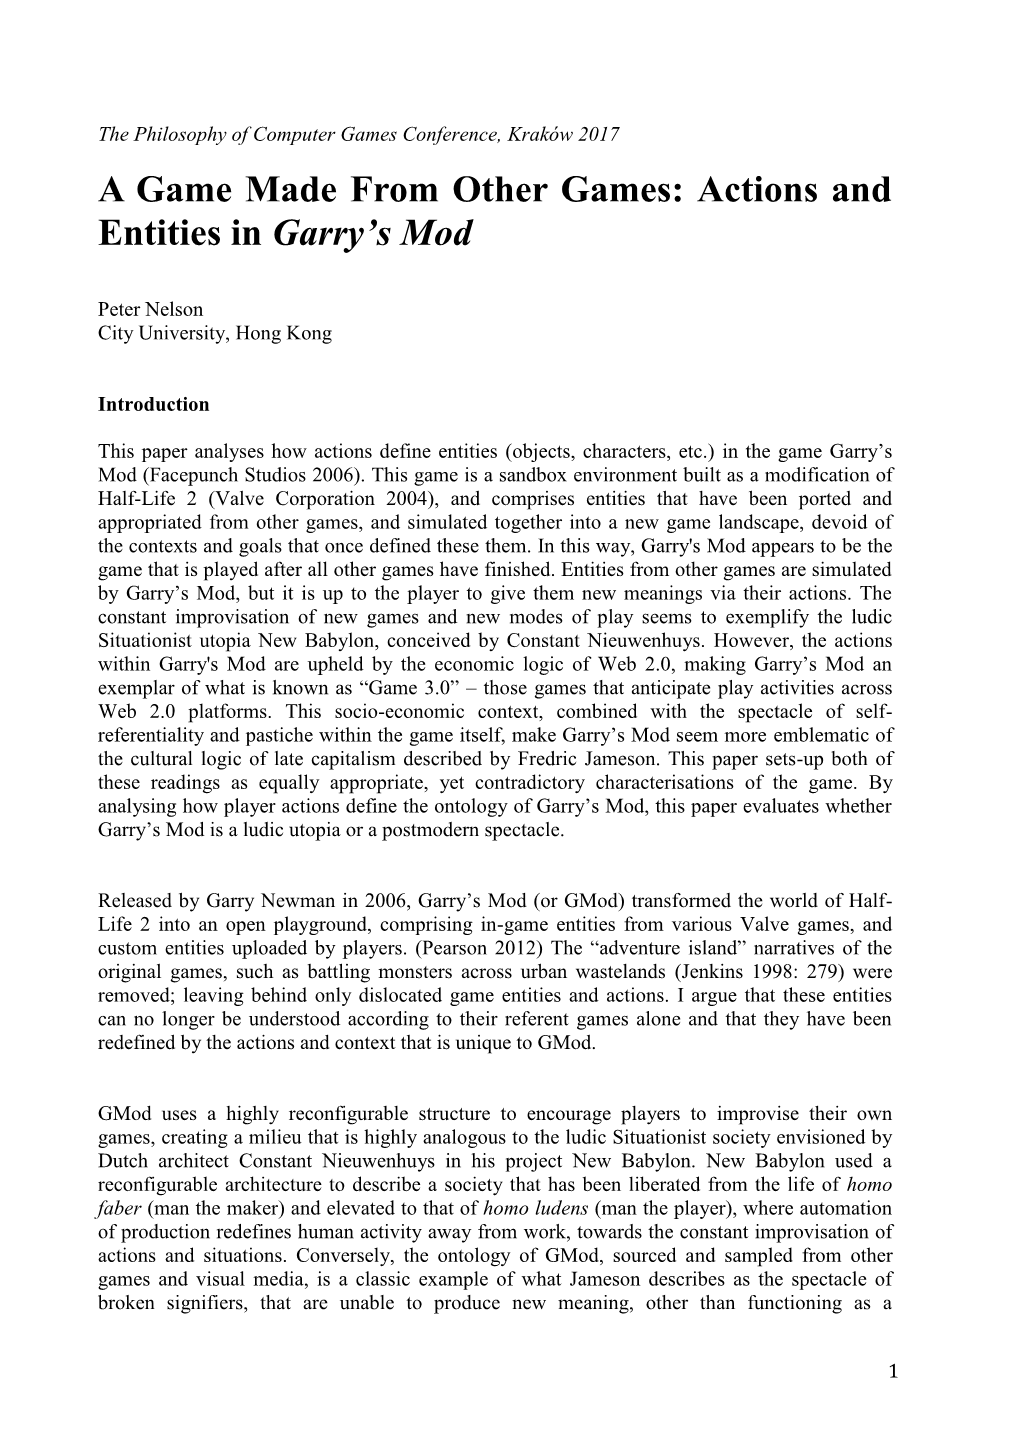 Actions and Entities in Garry's